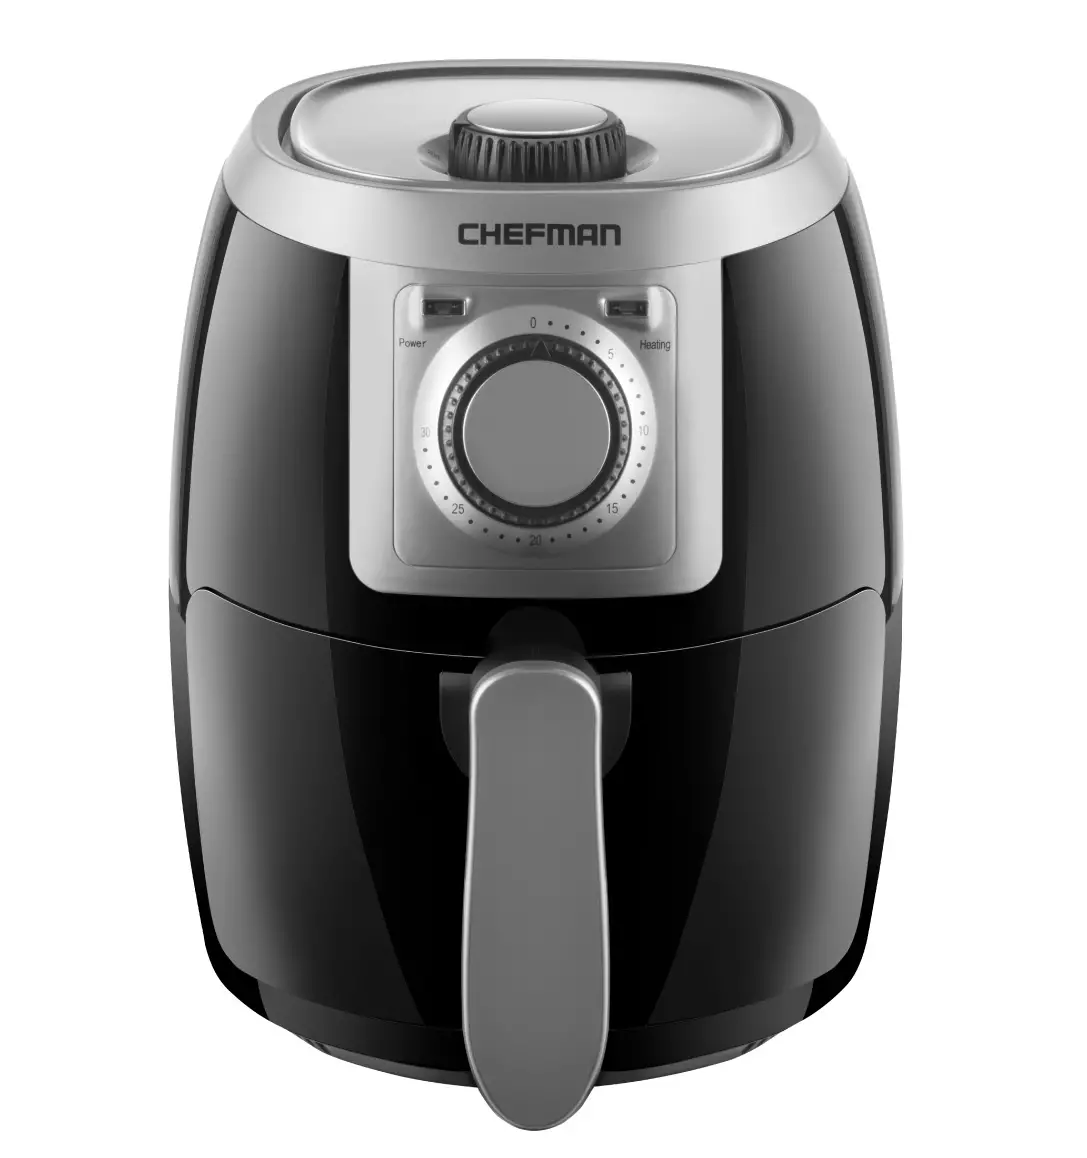 Chefman TurboFry 2 Liter Air Fryer with Adjustable Temperature Control ...